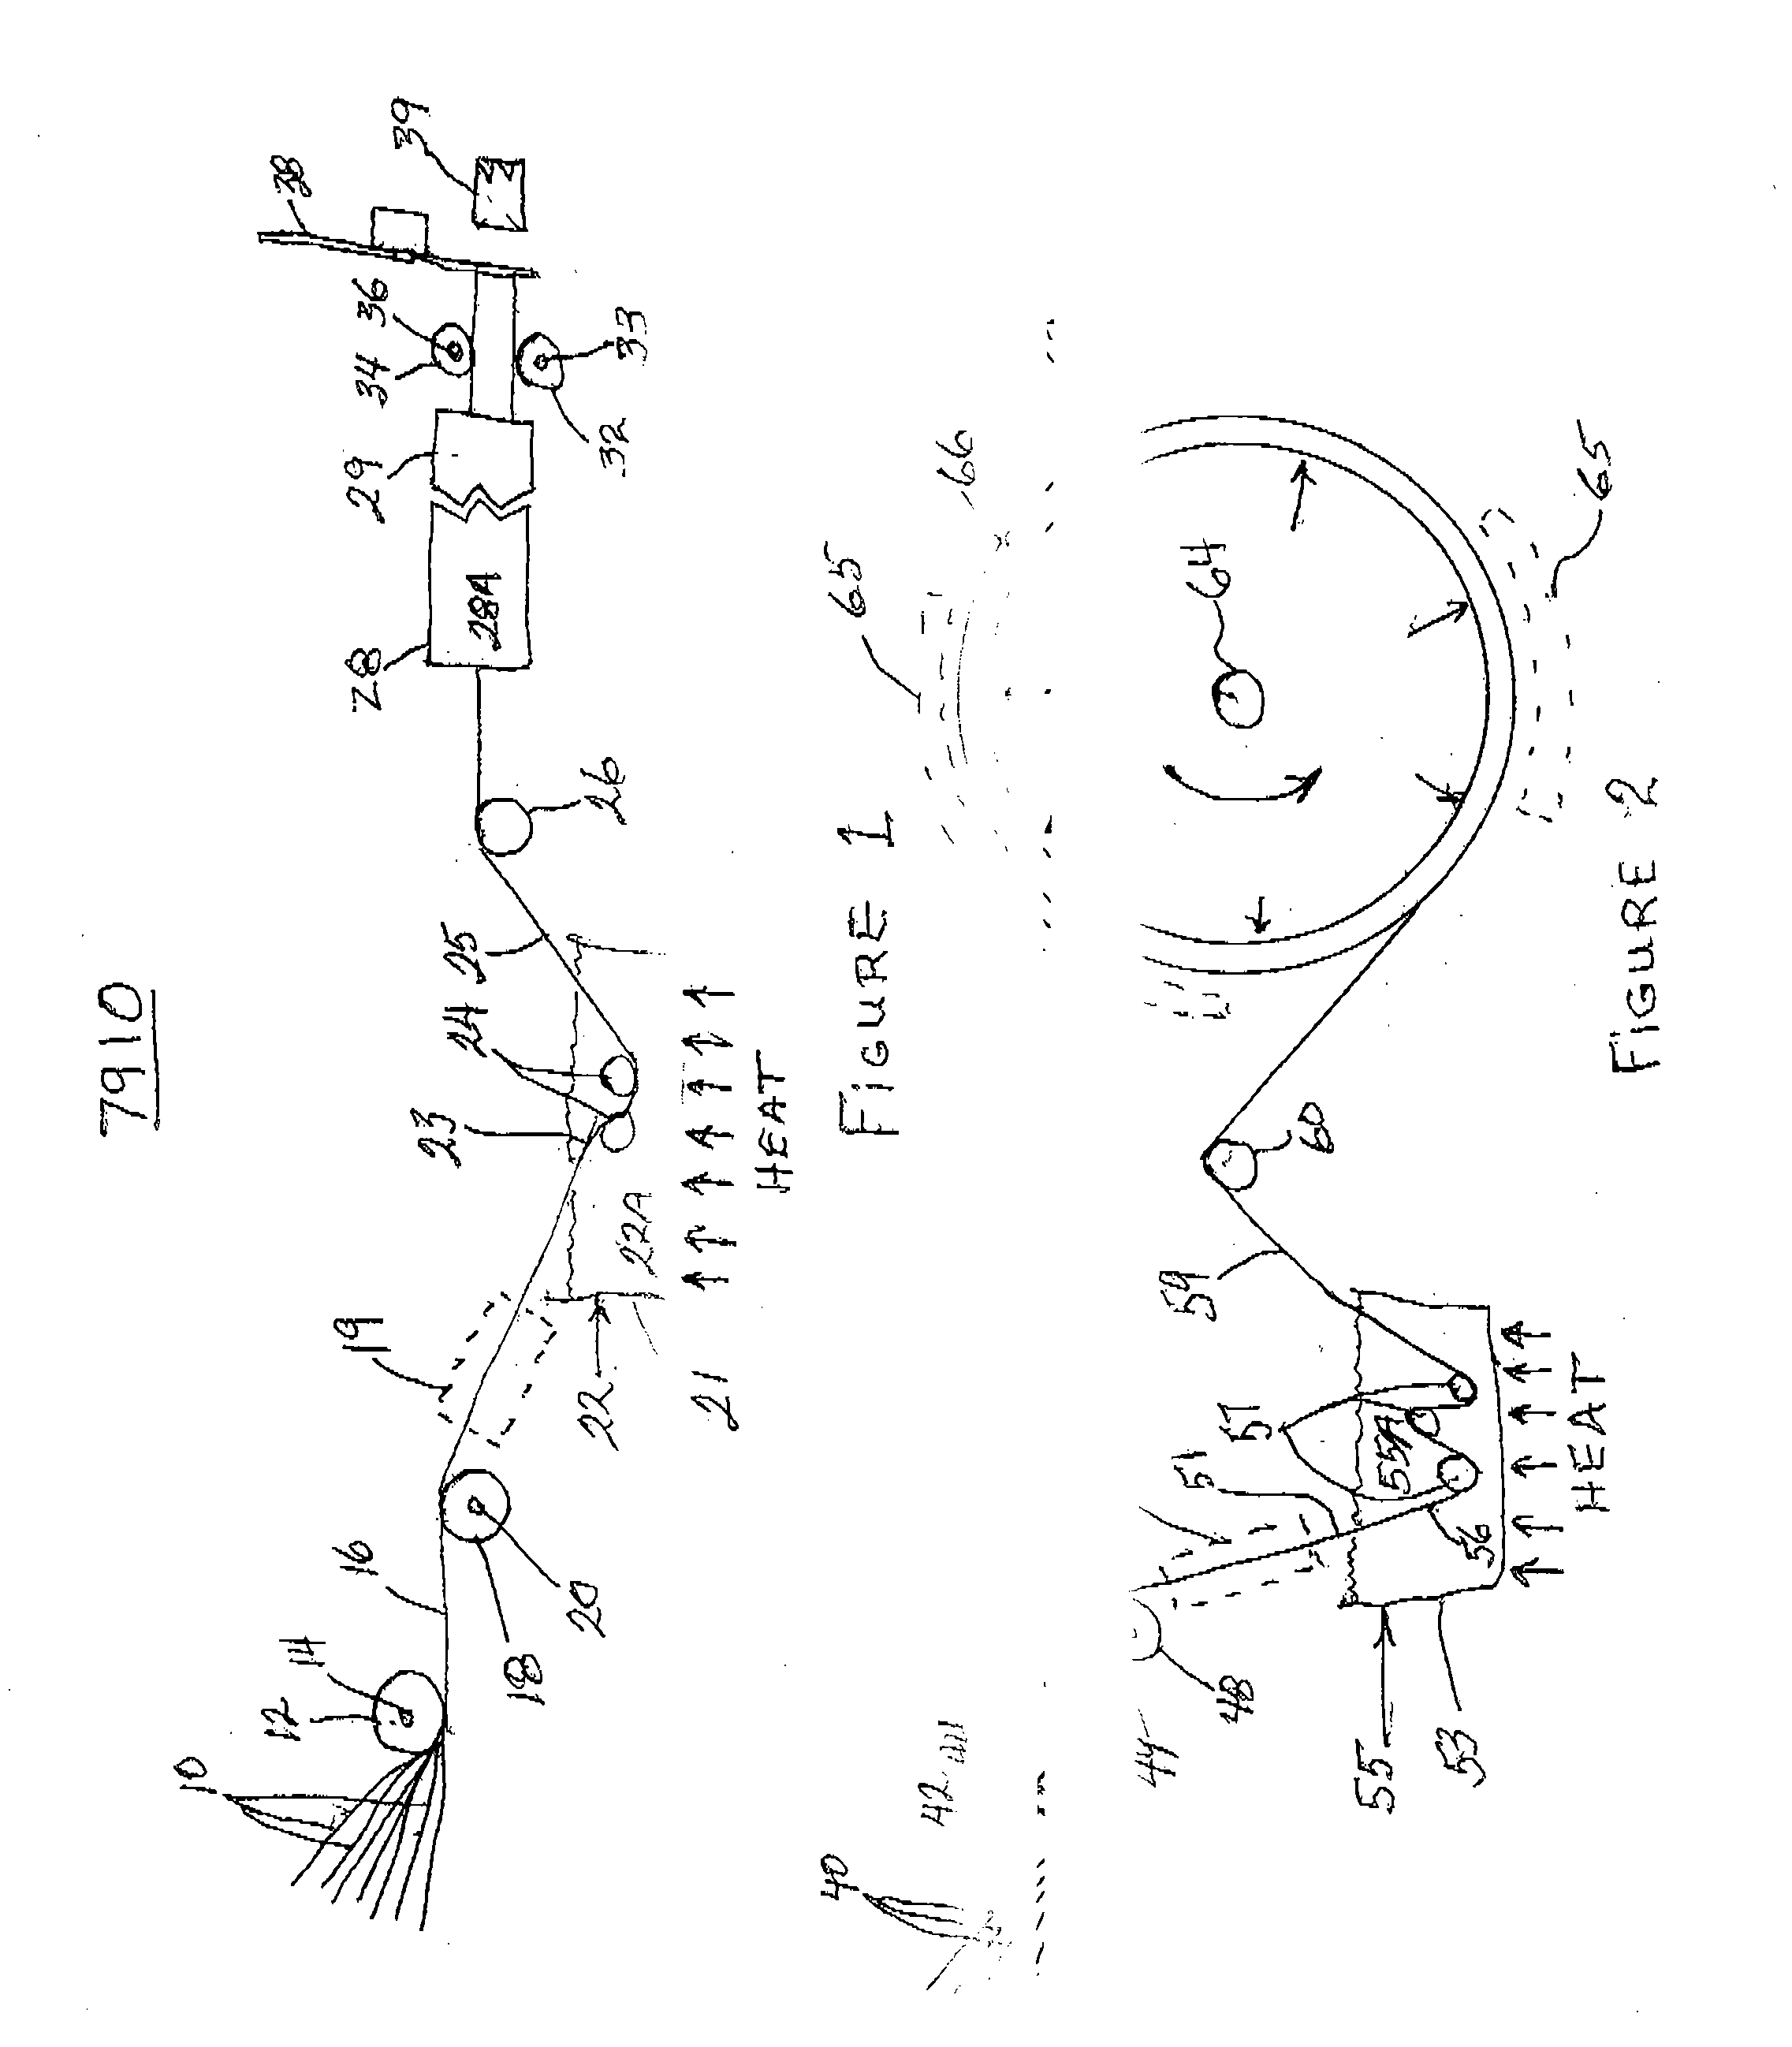 Methods and systems for making reinforced thermoplastic composites, and the products